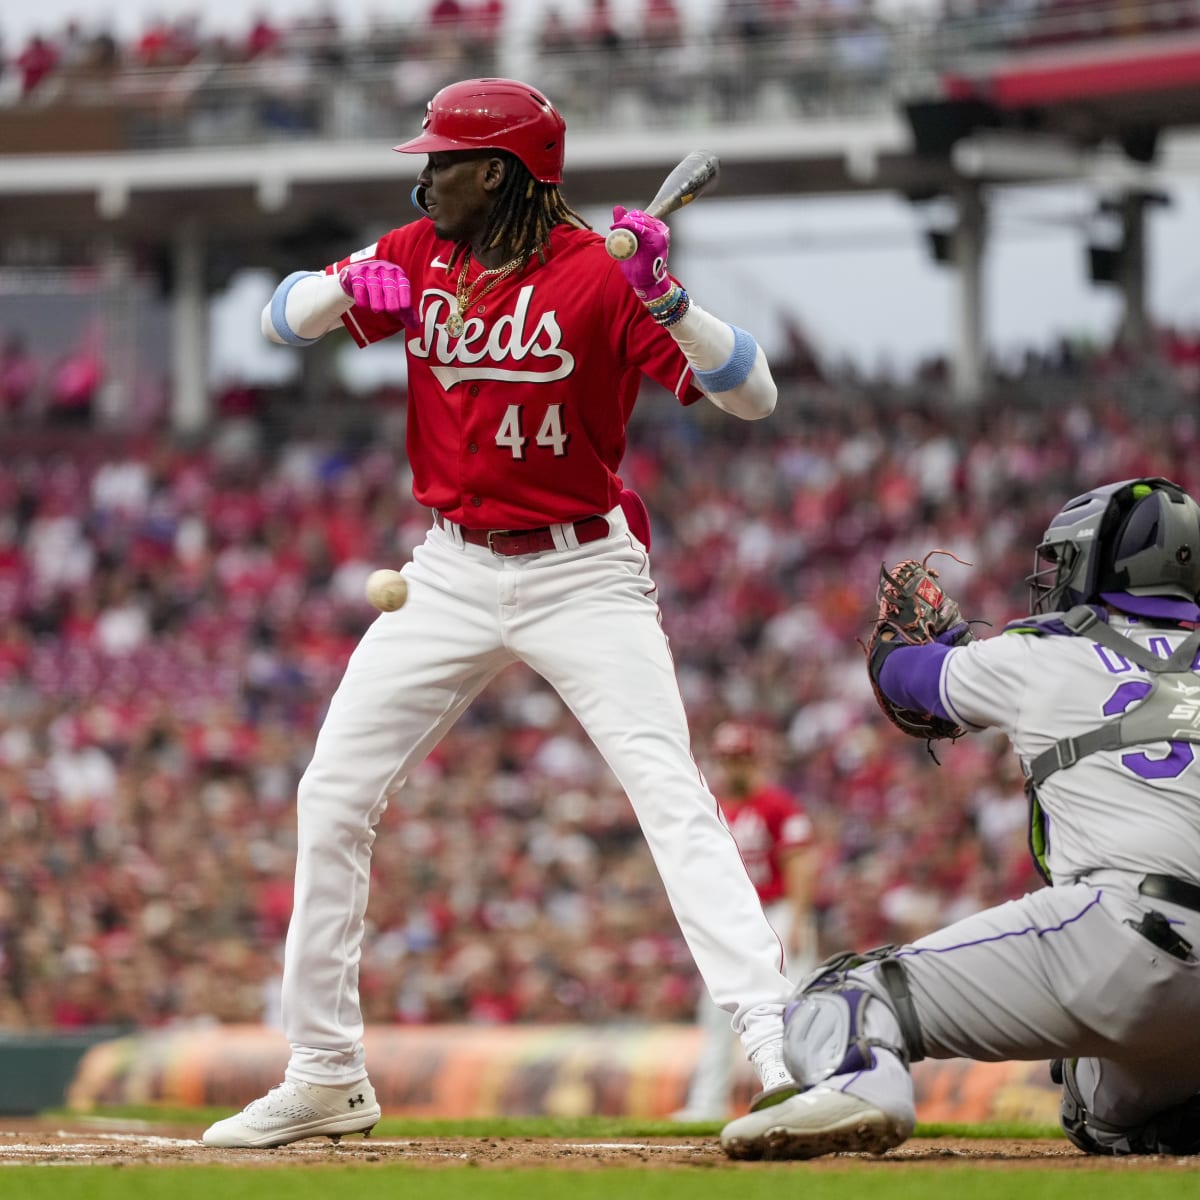 Cincinnati Reds Tie Franchise History with Another Win on Tuesday - Fastball